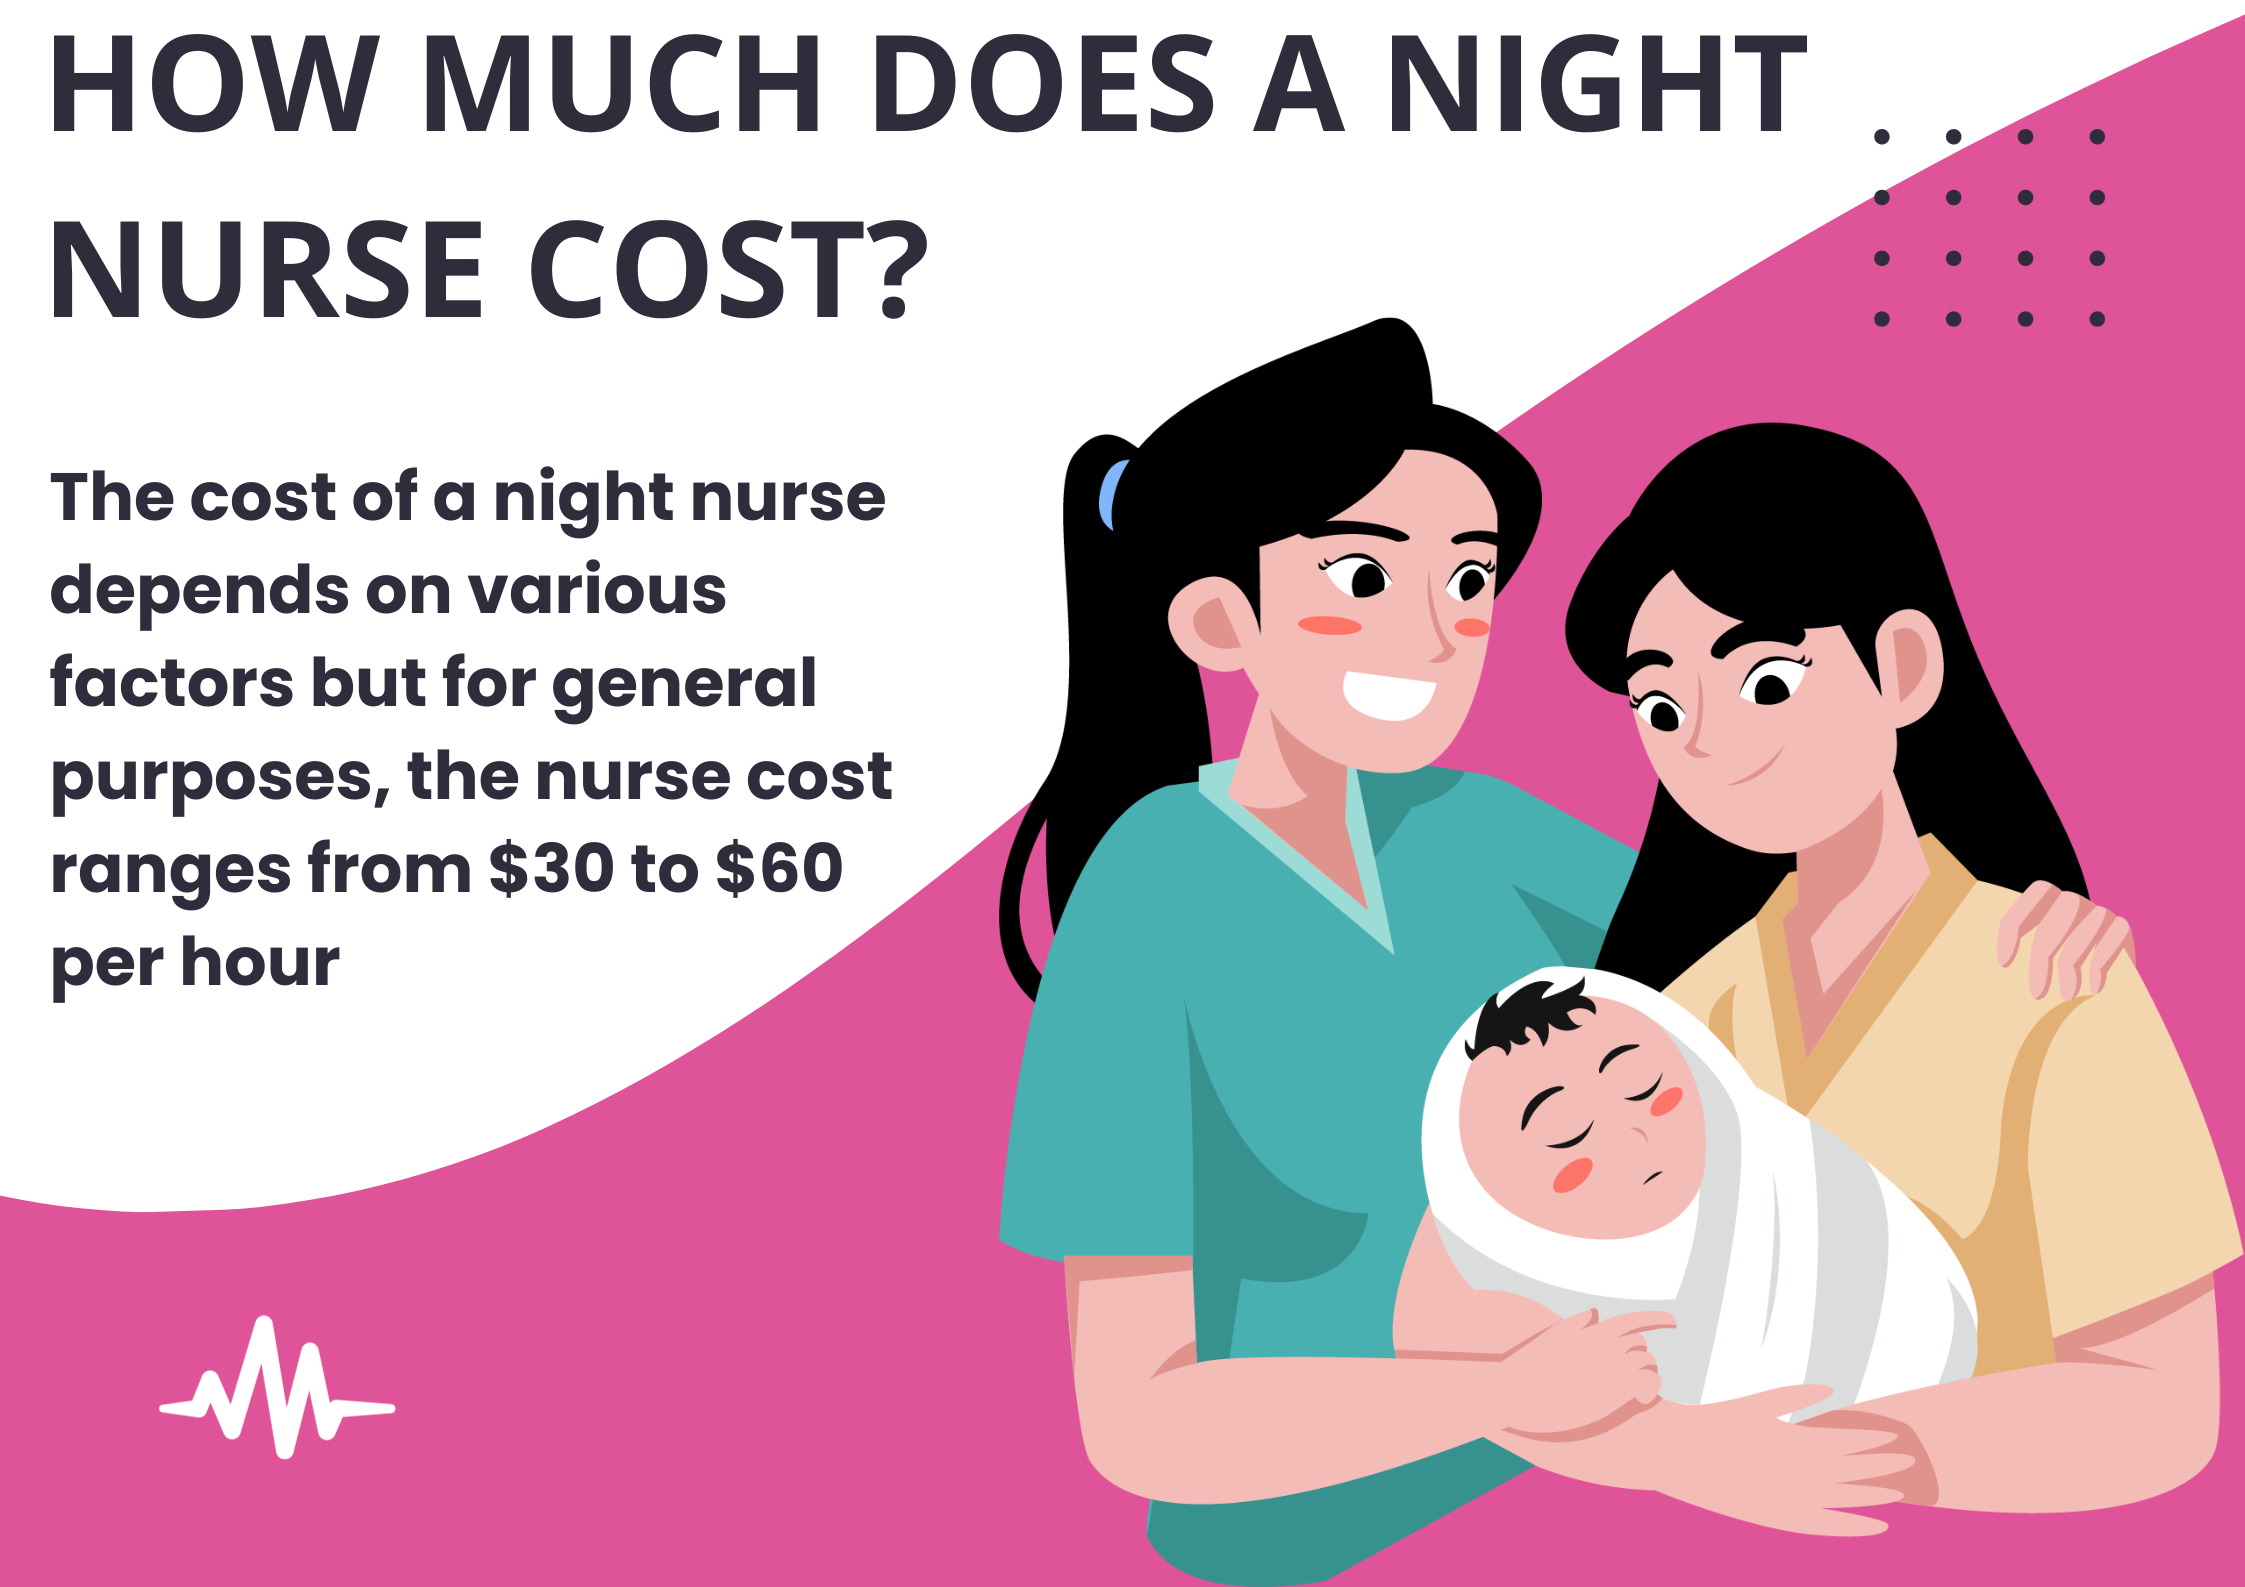 How much does a night nurse cost?